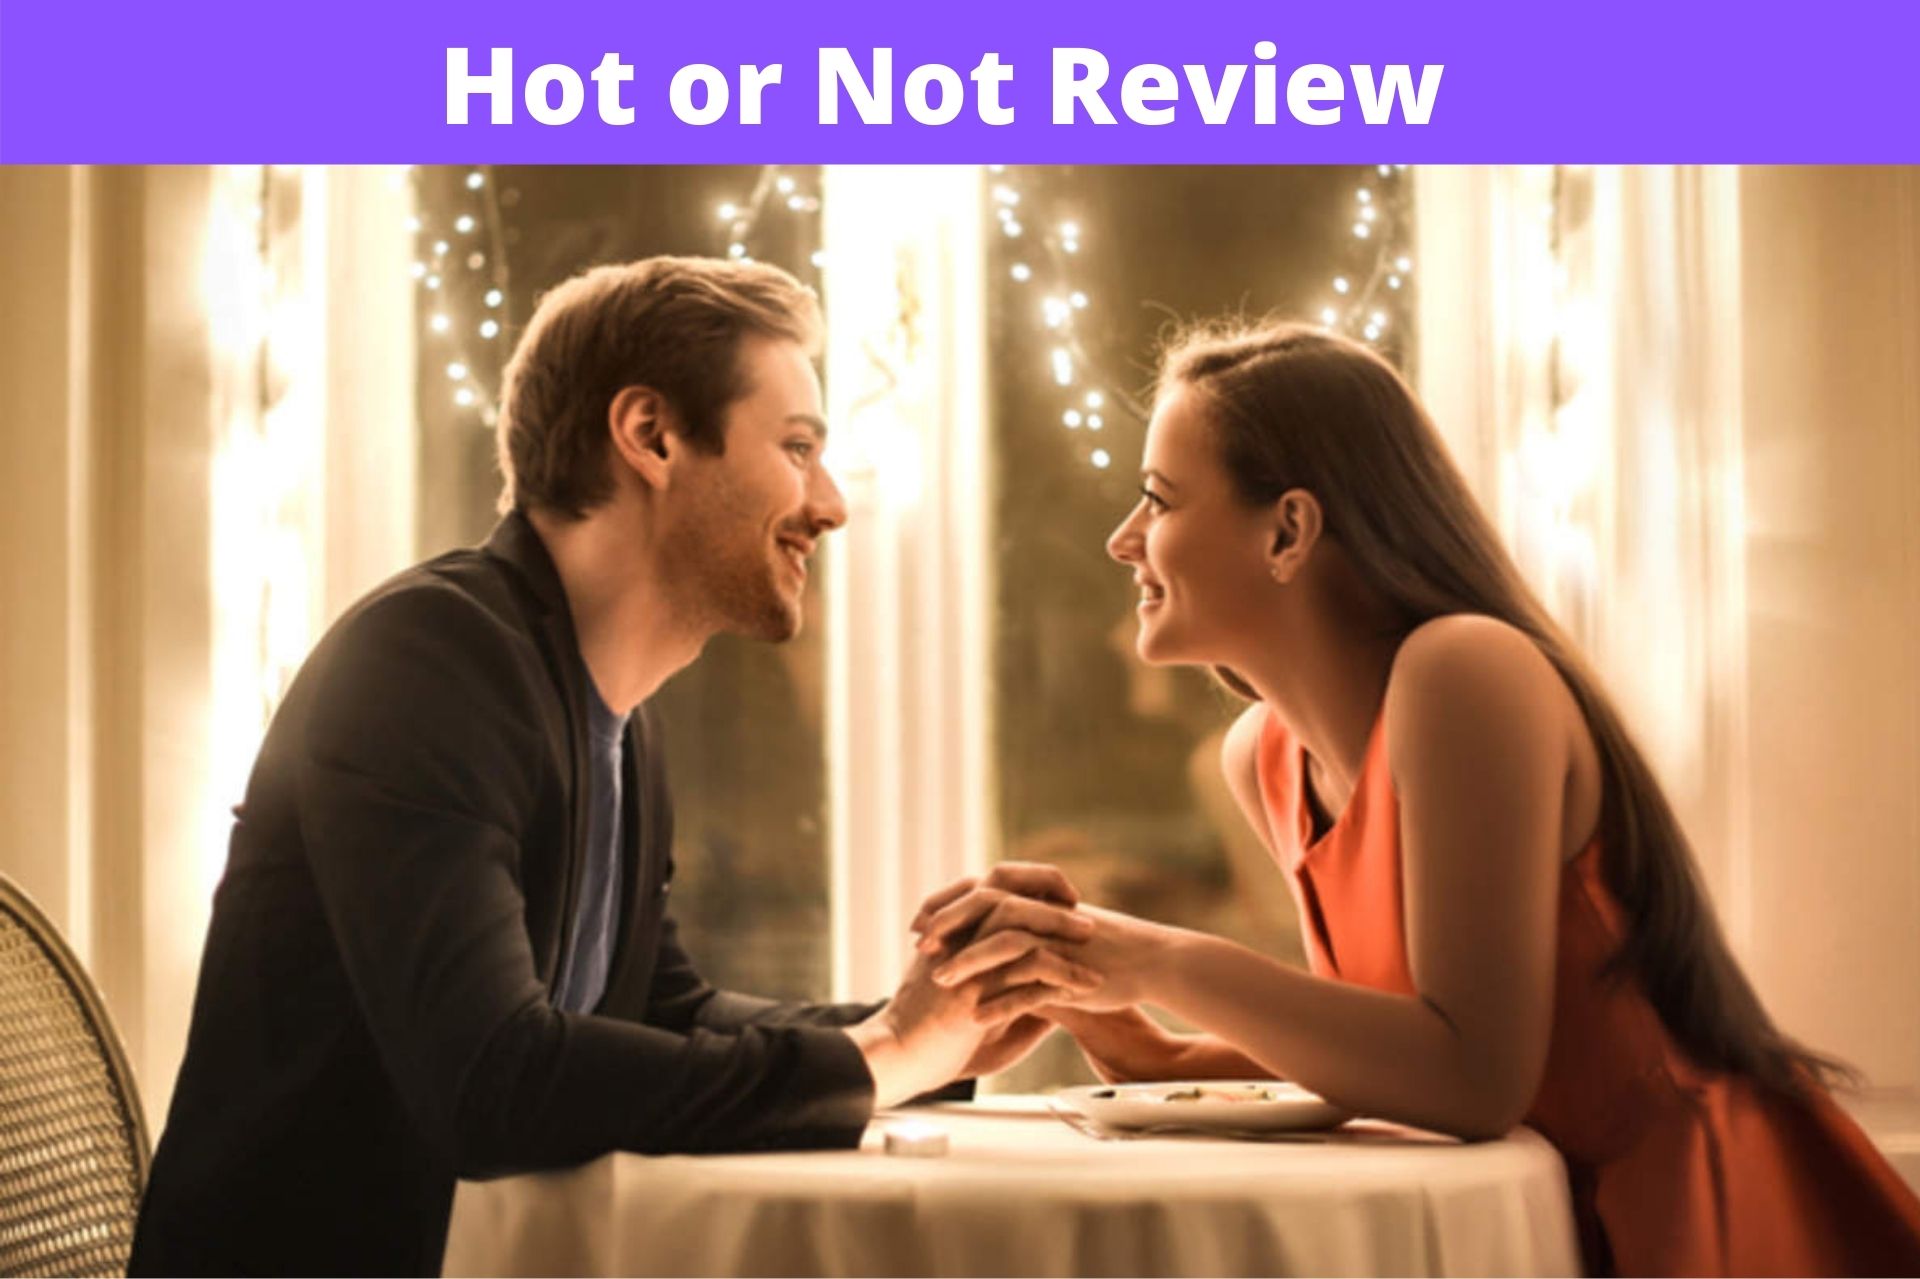 Hot or Not Reviews